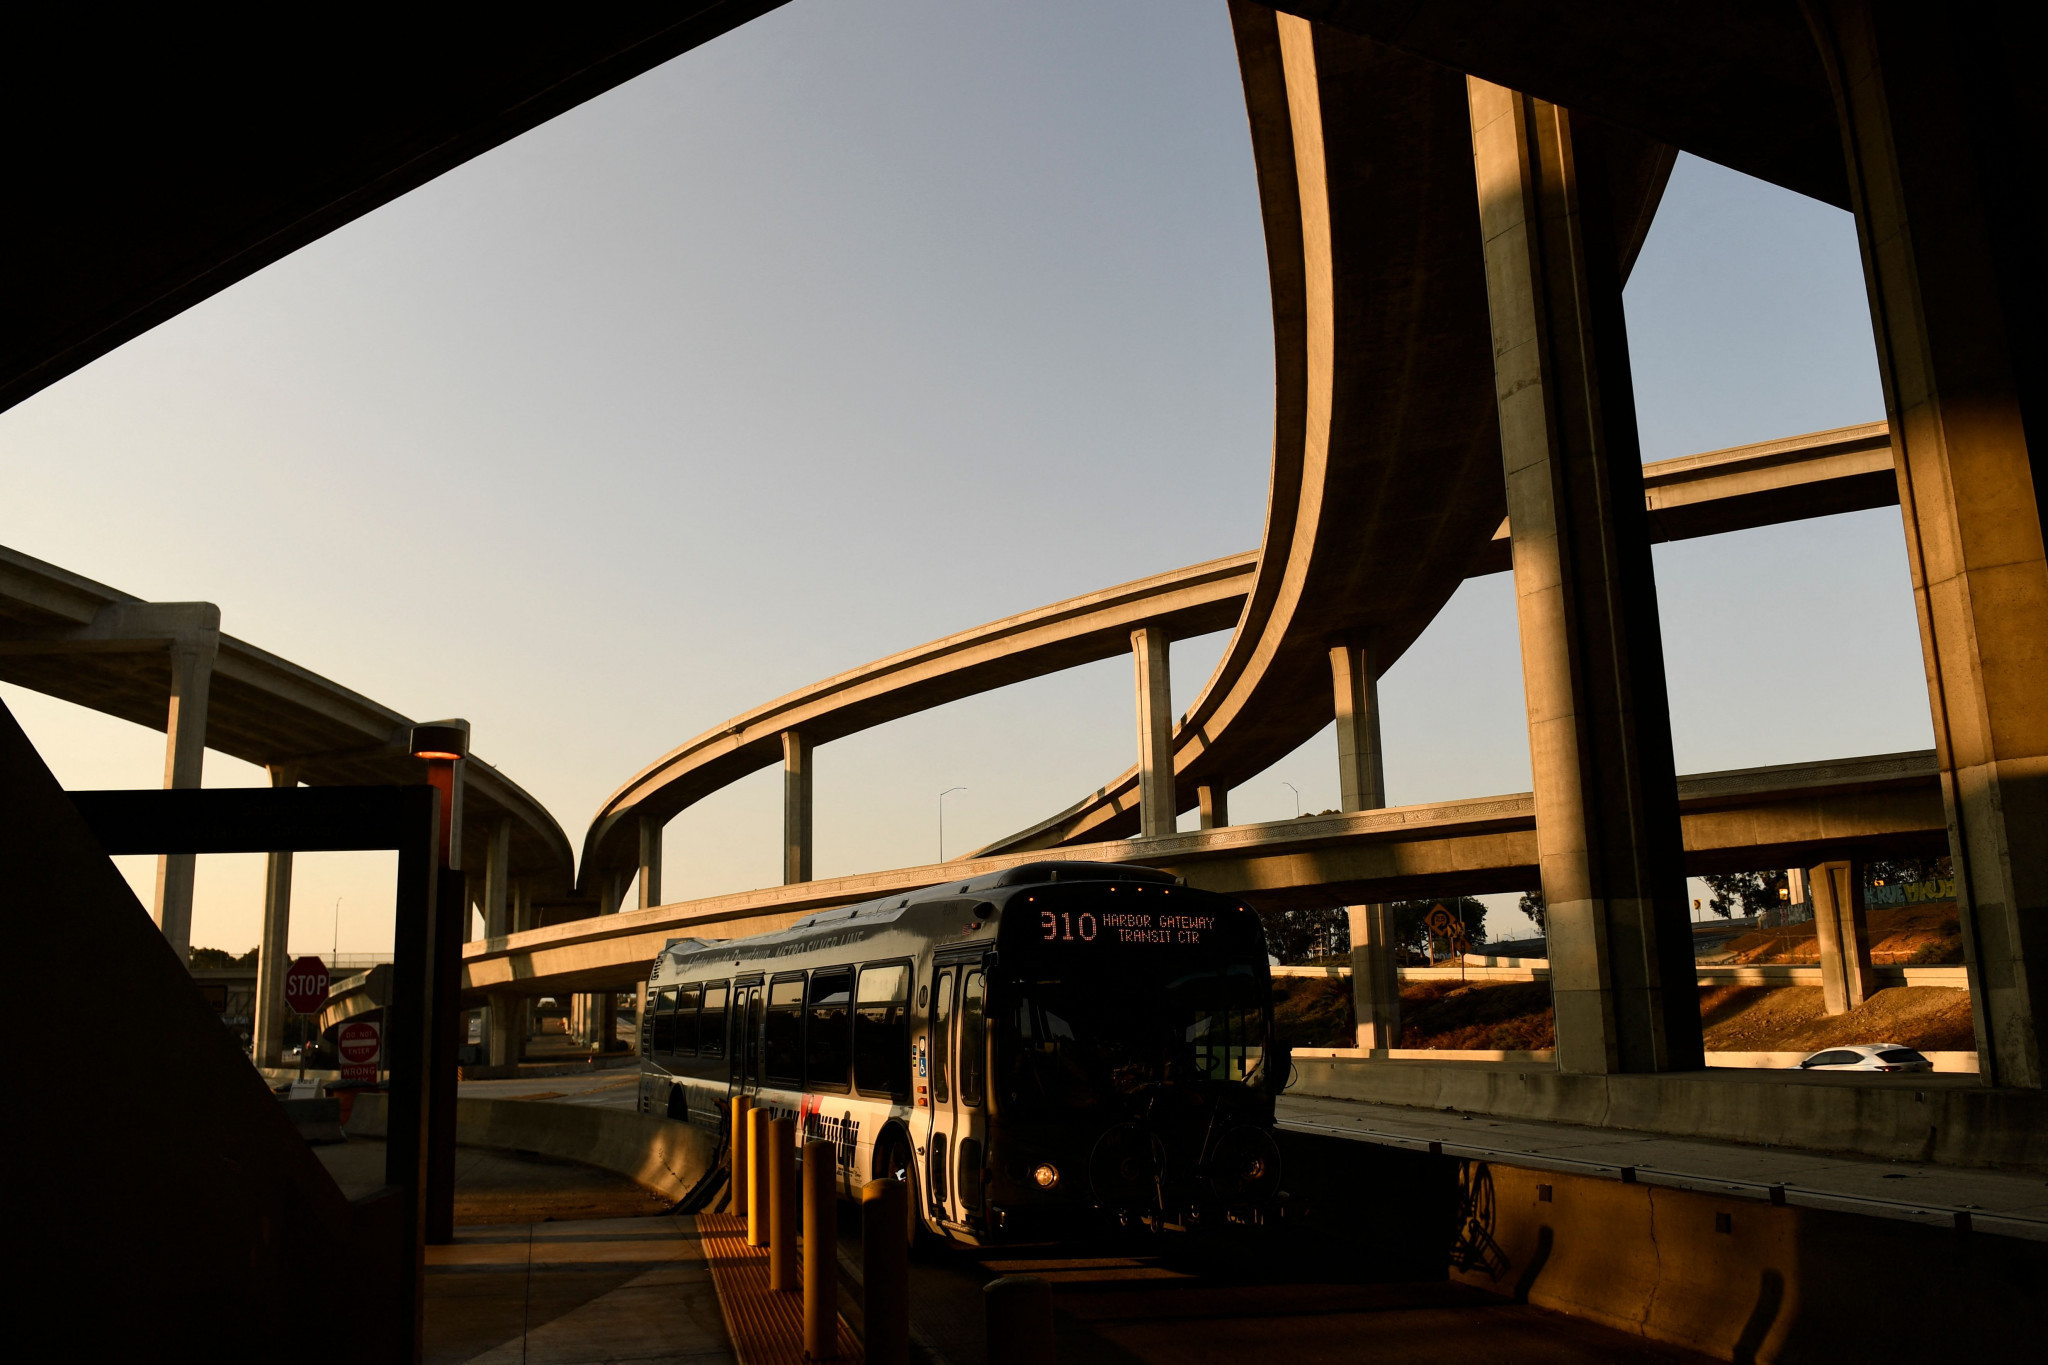 The Los Angeles Metro has highlighted 15 transport projects which it hopes to implement in time for the 2028 Summer Olympics and Paralympics ©Getty Images